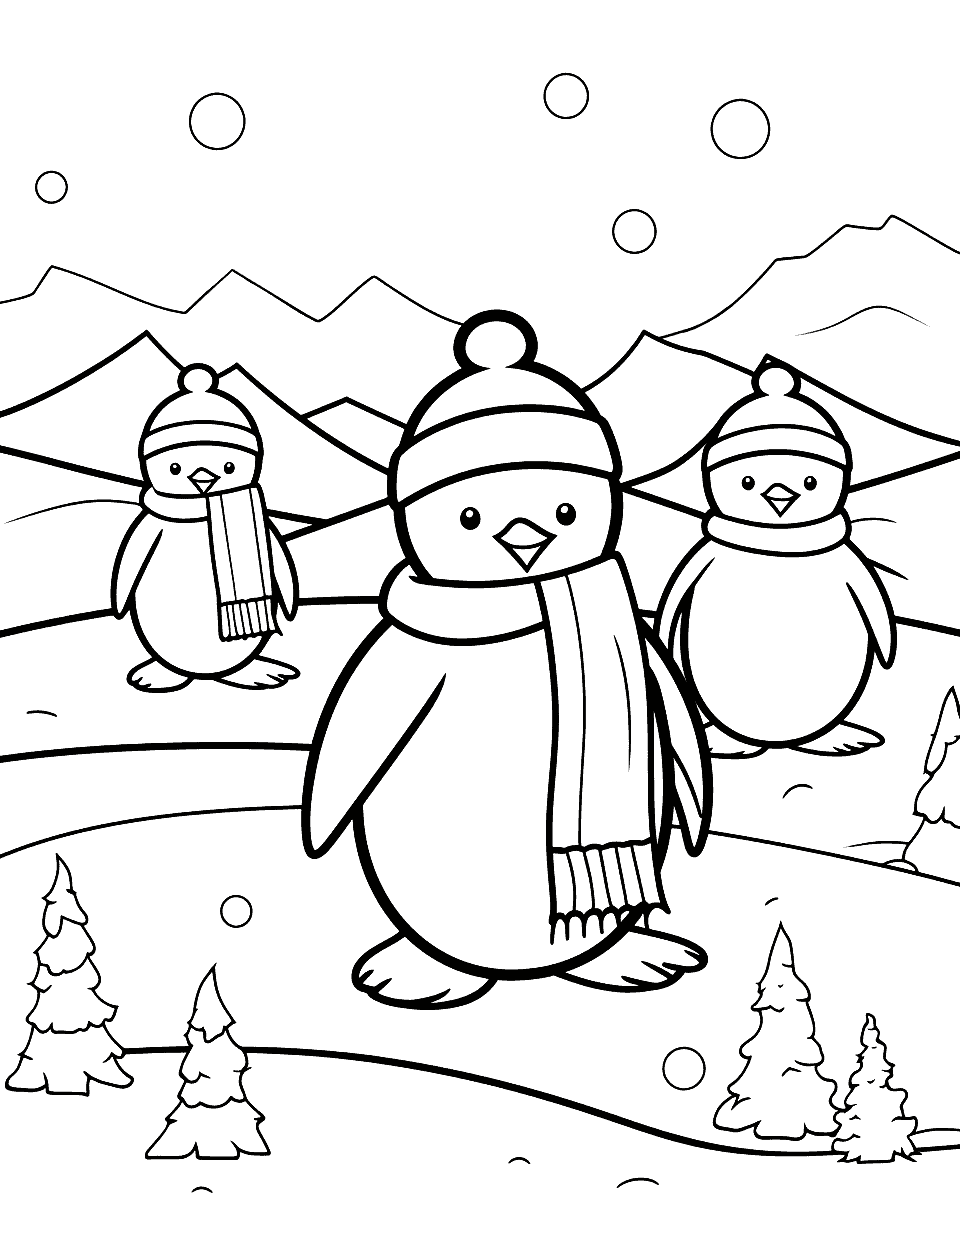 Cute Penguin Parade Winter Coloring Page - Adorable penguins waddling through a snowy landscape. Great for honing fine motor skills in kindergarten.